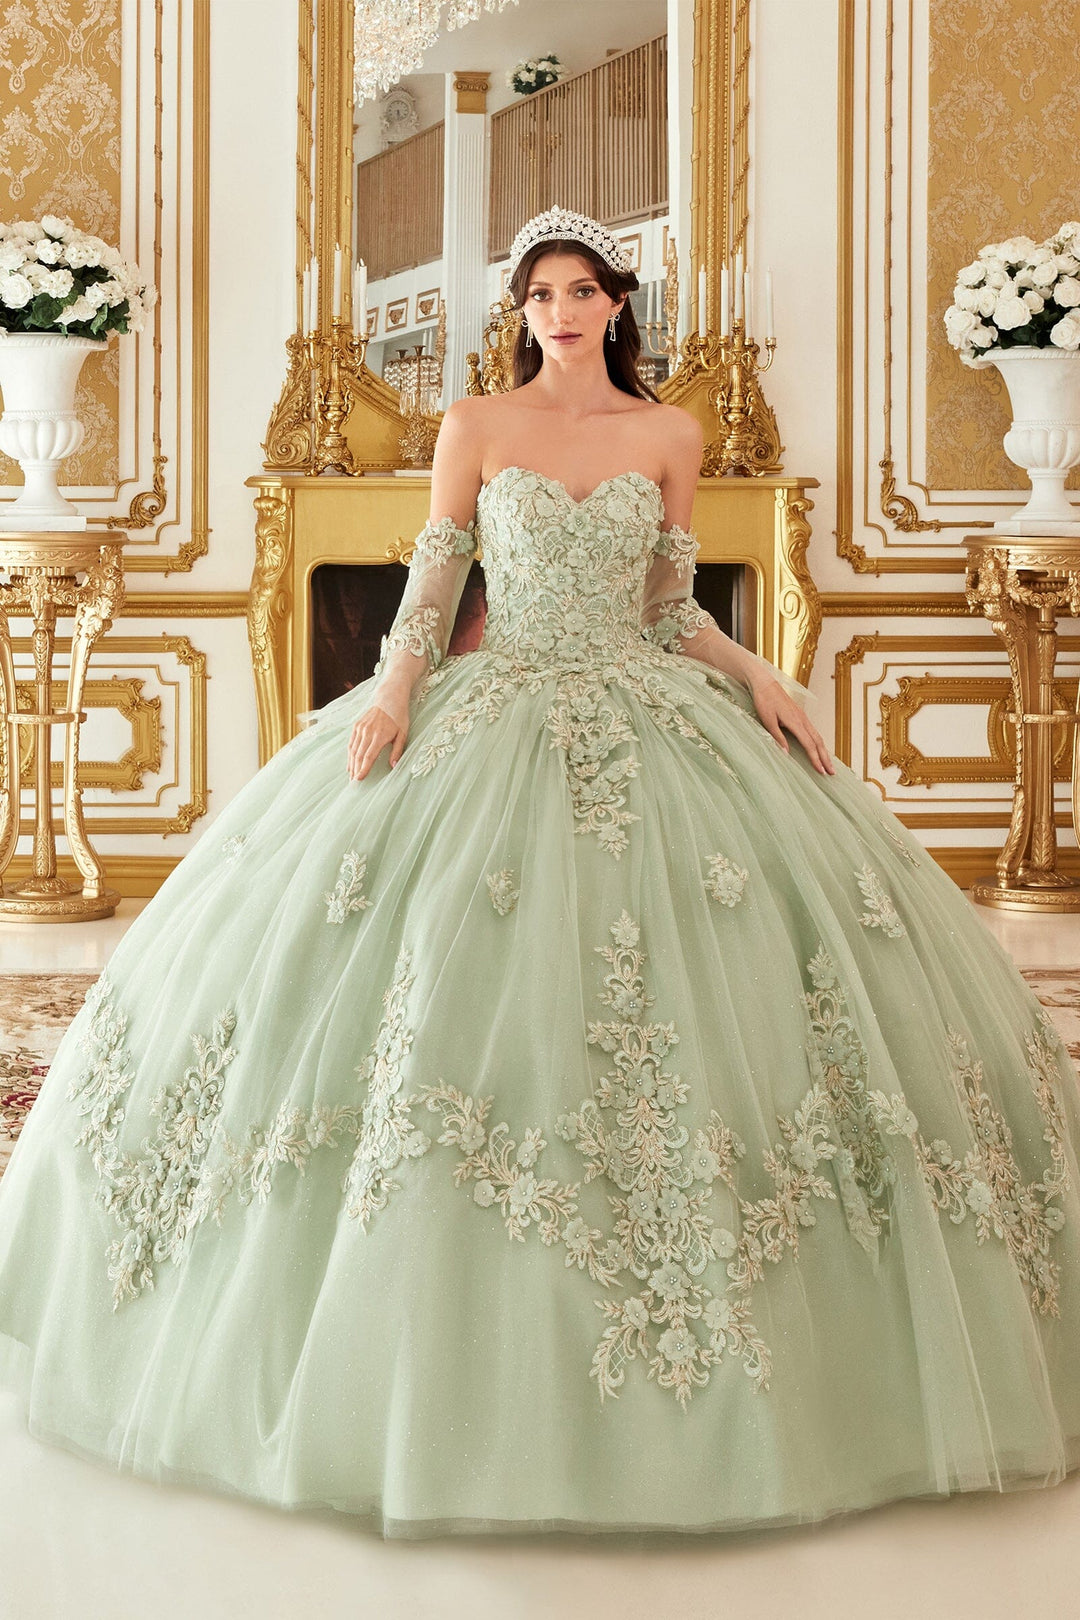 3D Floral Applique Strapless Ball Gown by Ladivine 15714